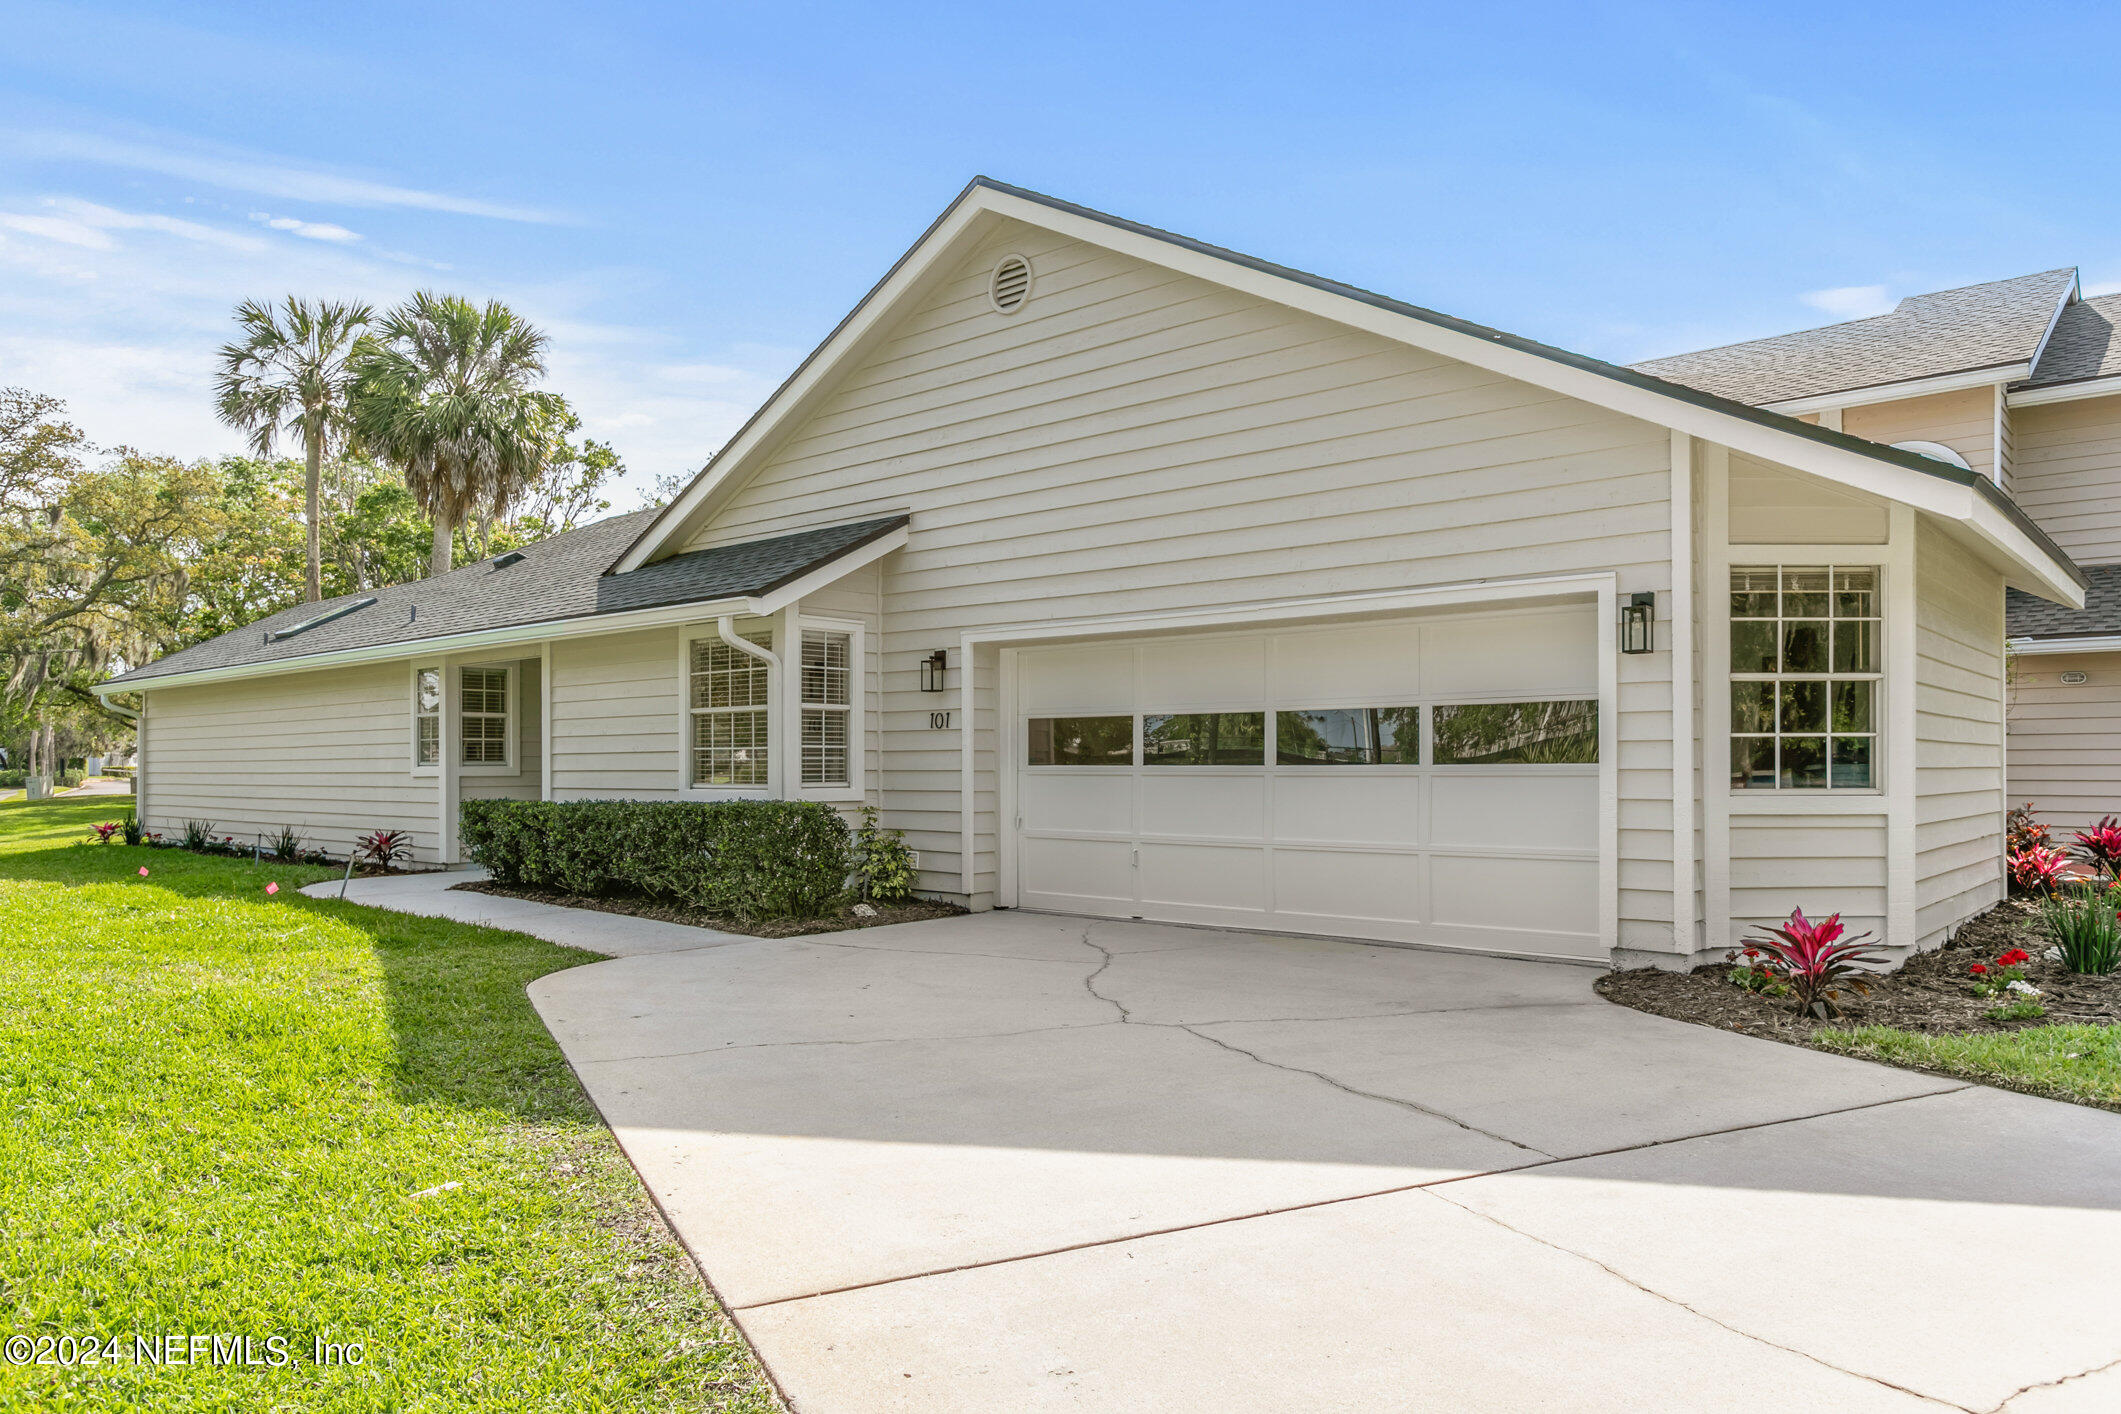 Ponte Vedra Beach, FL home for sale located at 101 Island Drive, Ponte Vedra Beach, FL 32082